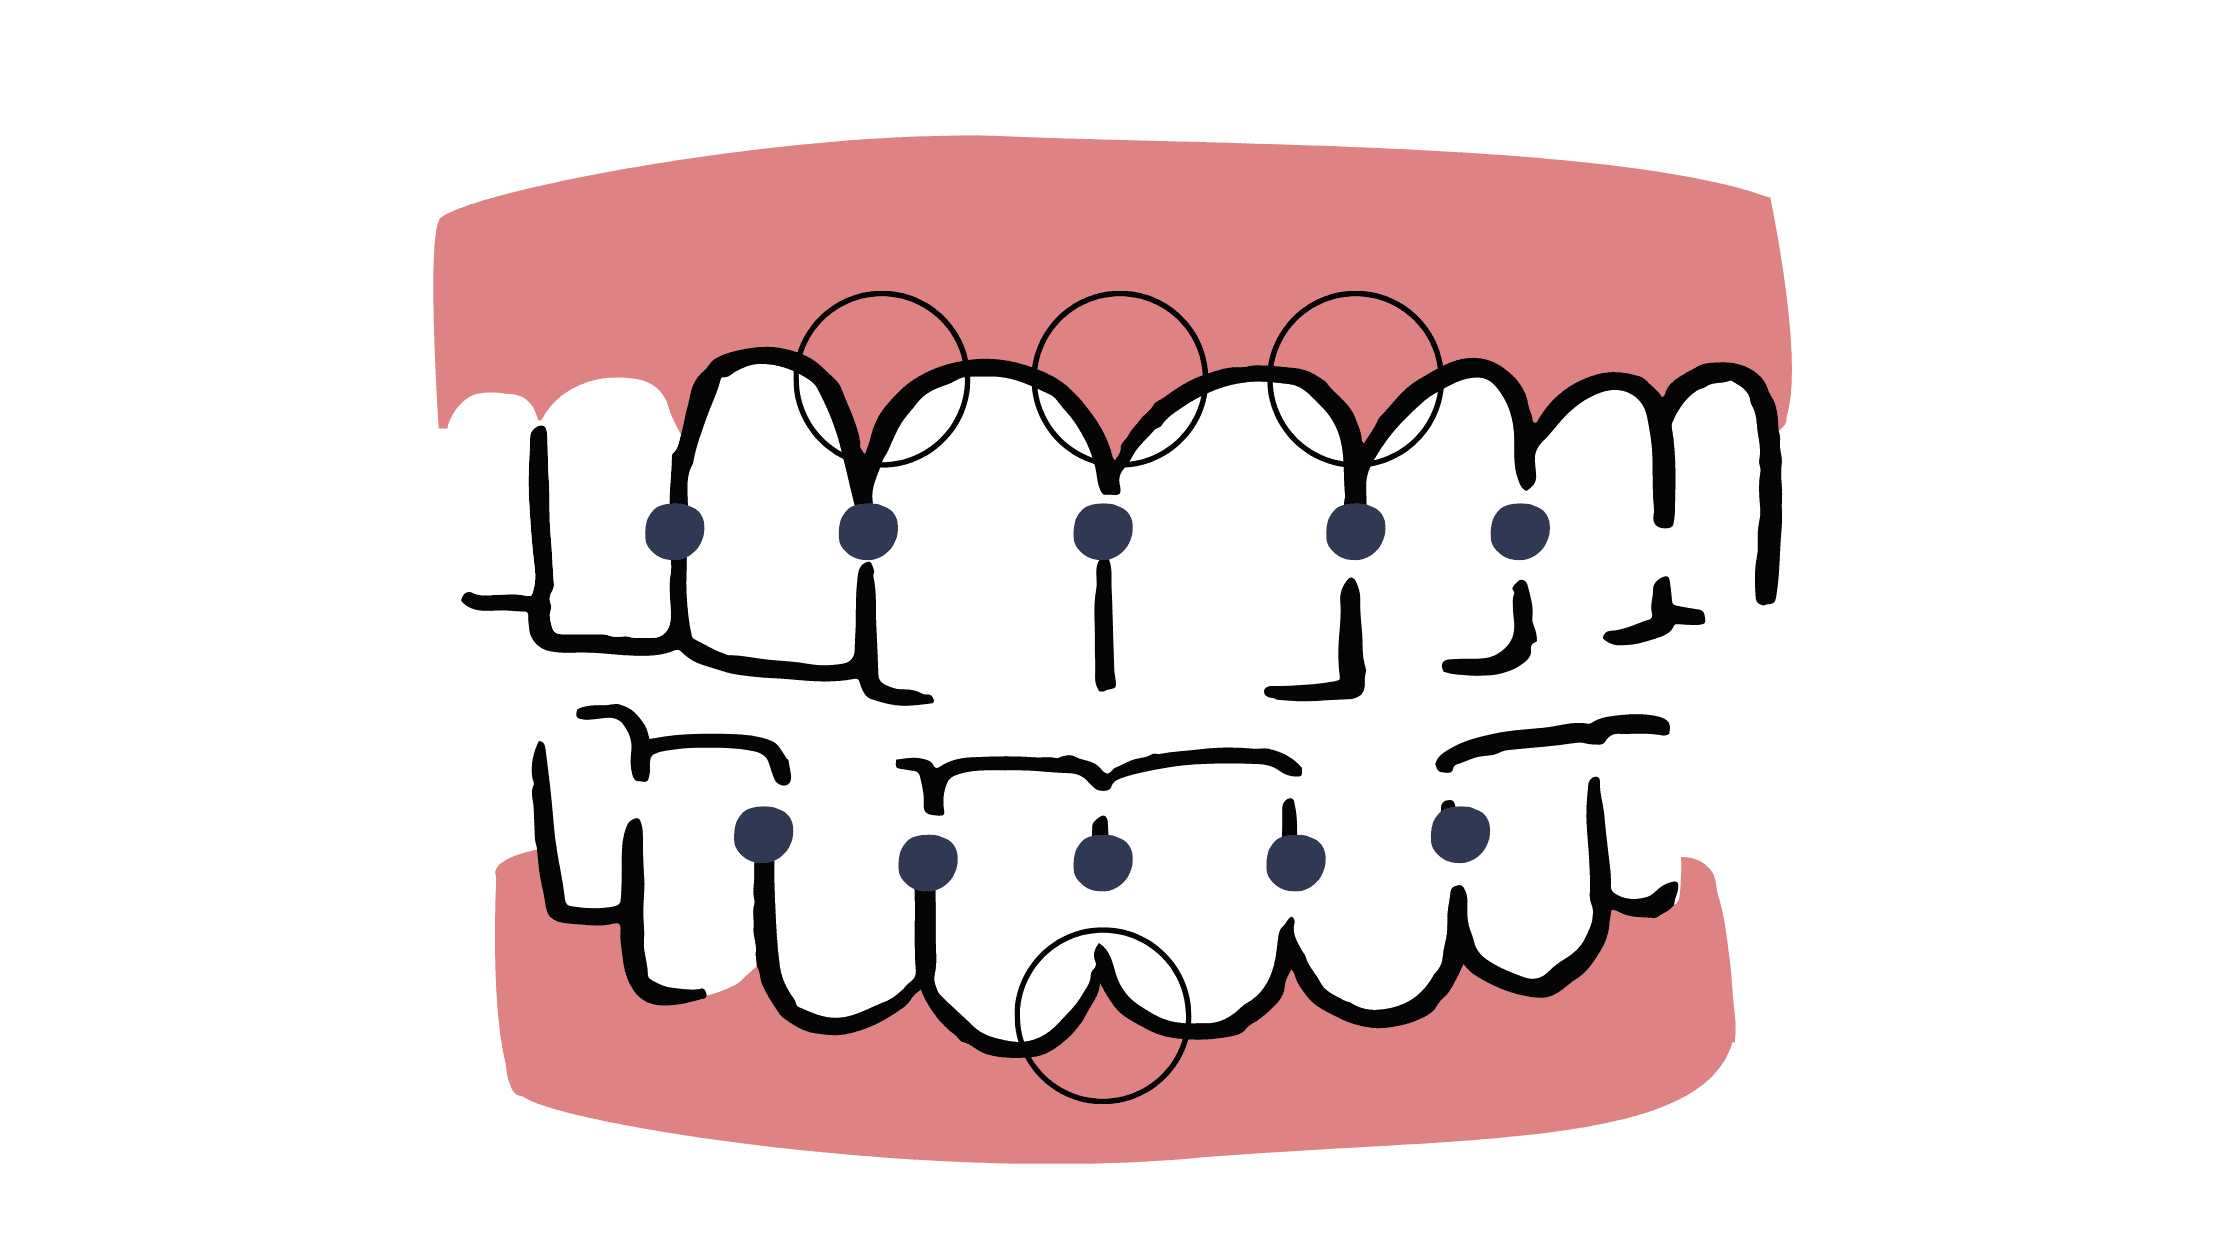 Teeth contact point and surrounding papilla